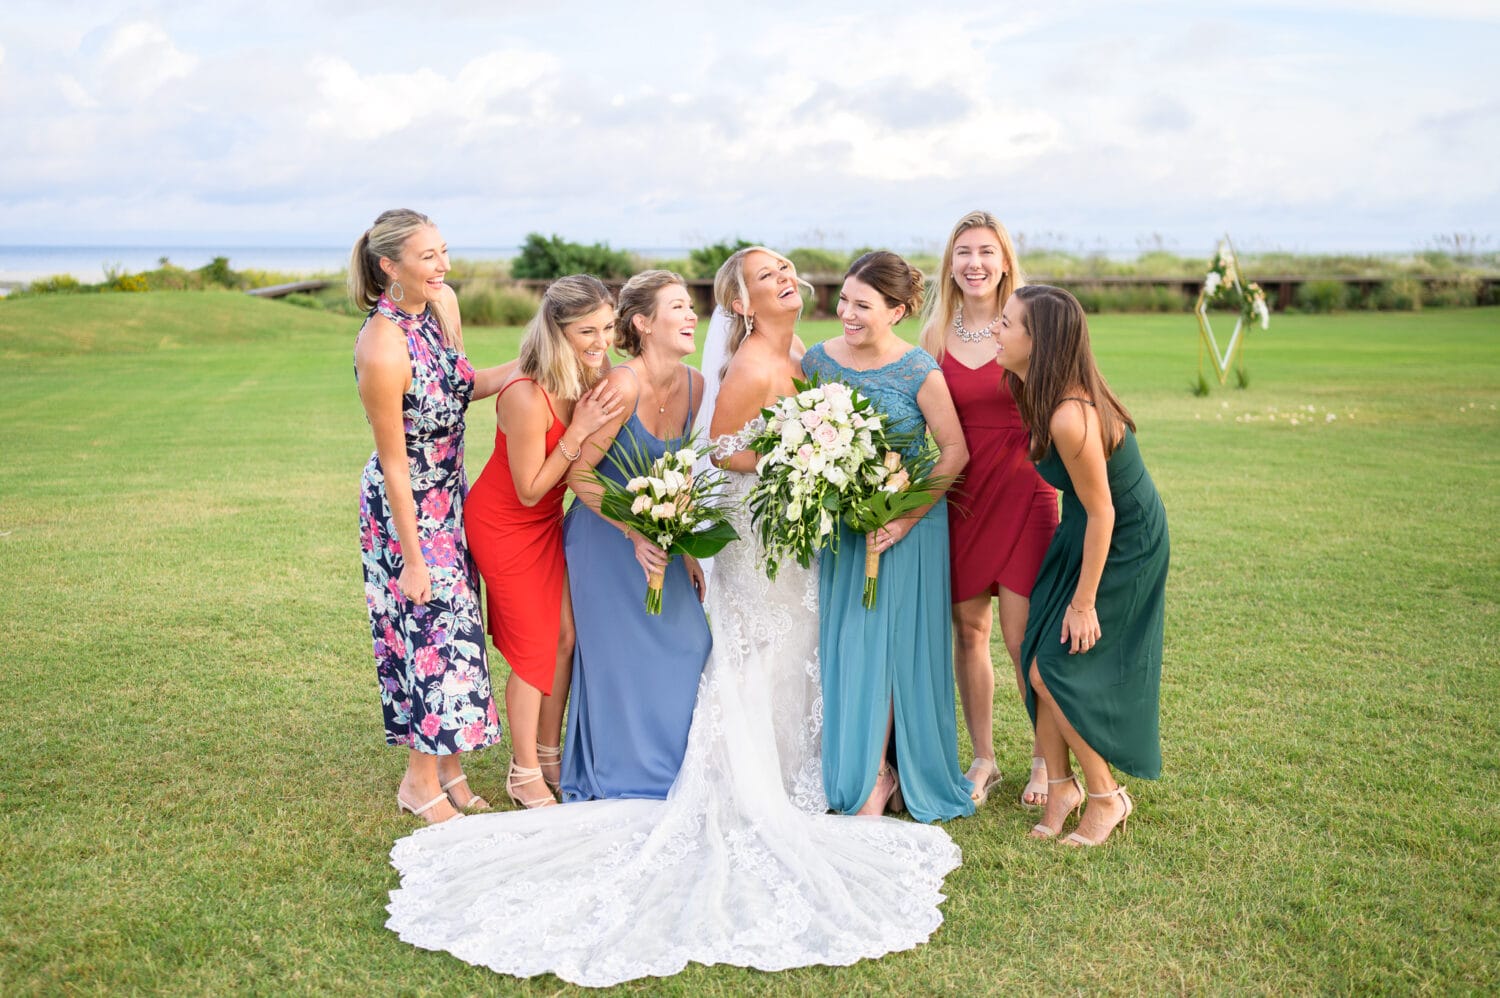 Bride laughing with friends after ceremony - Dunes Golf and Beach Club